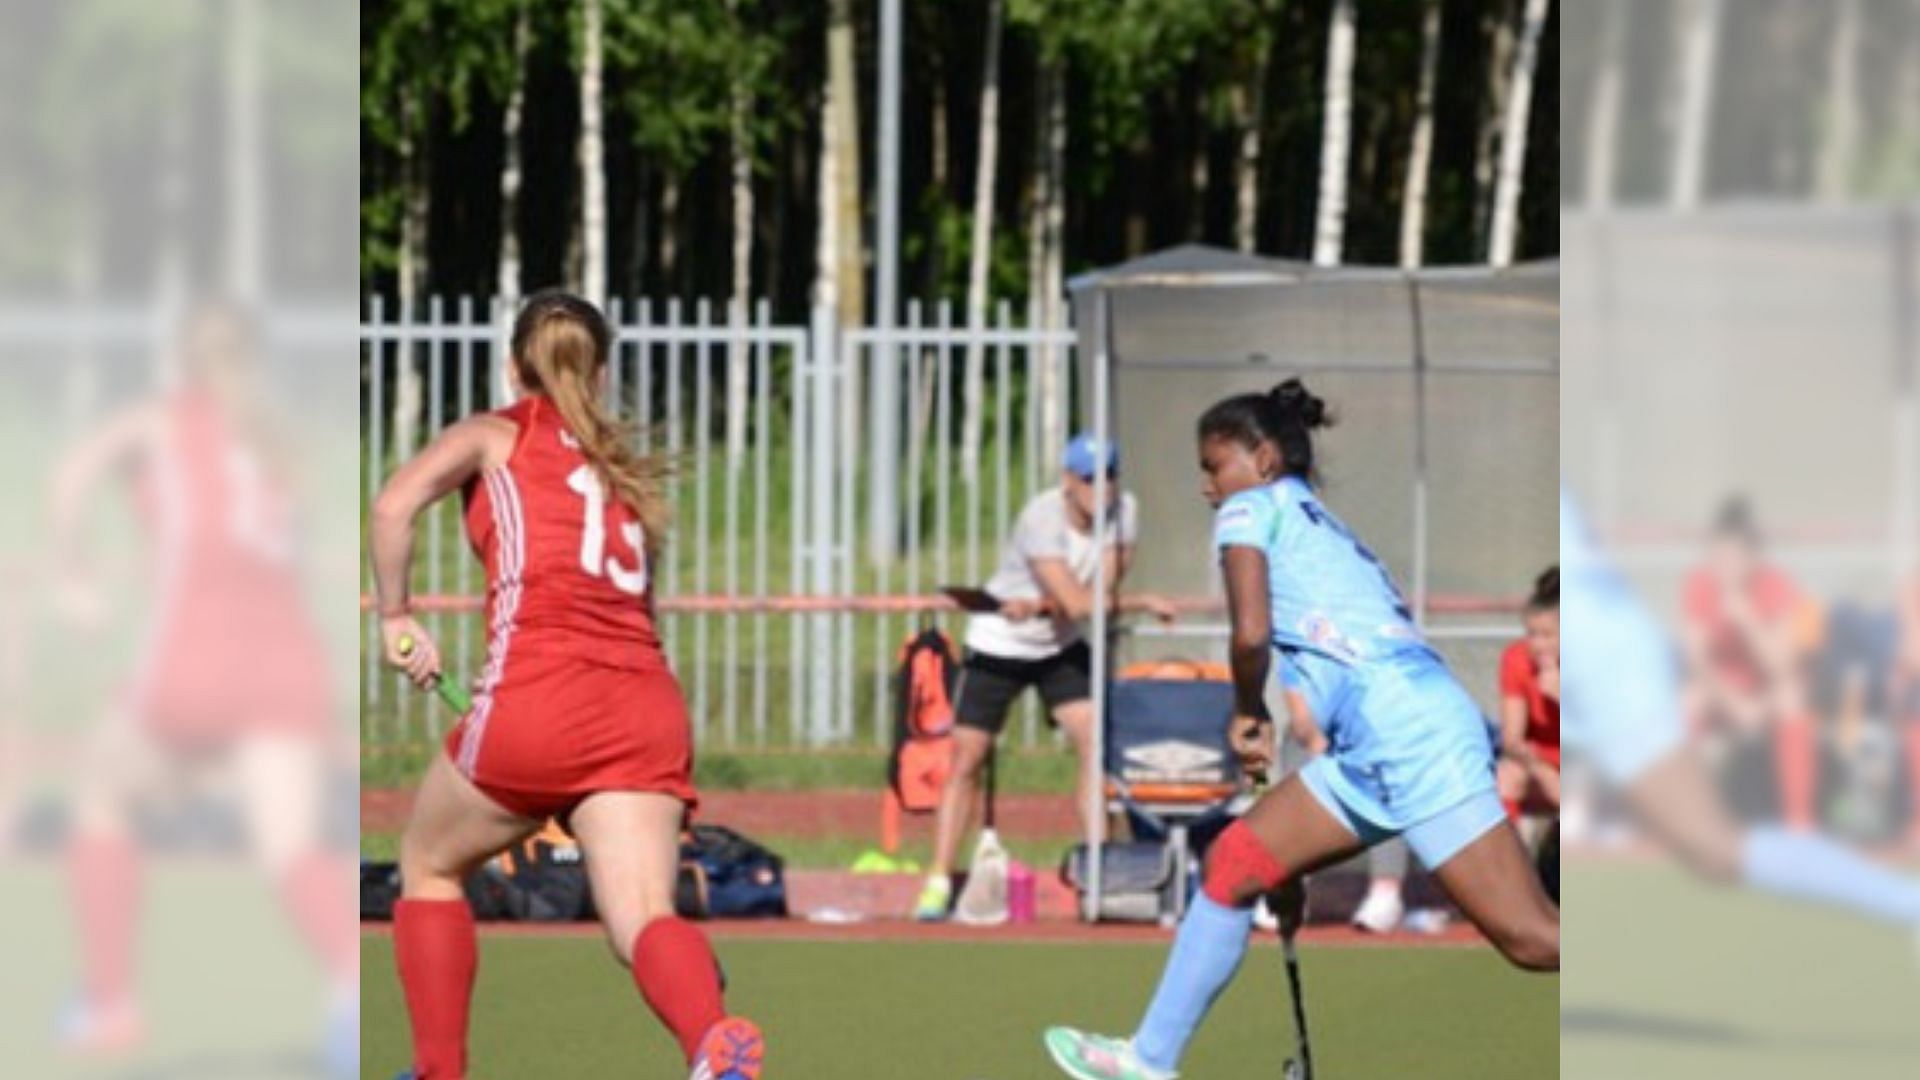 Indian team concluded their tour of Belarus recording two wins, two losses and a draw in the five-game series.